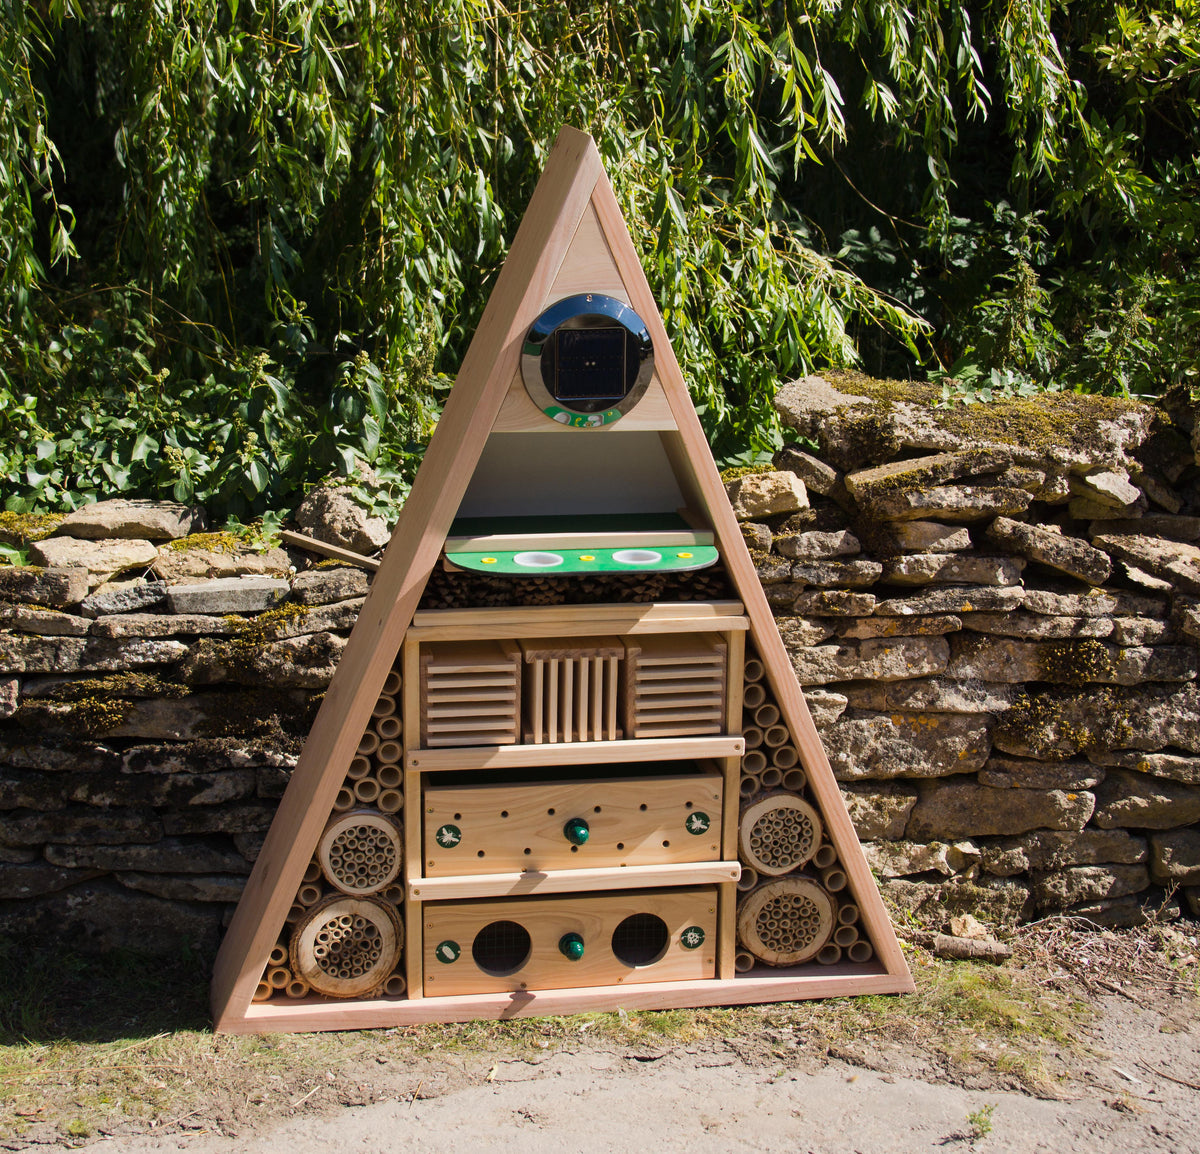 Educational Insect Habitat (Including Lesson Plan) - A Stunning Pyramid Insect Hotel